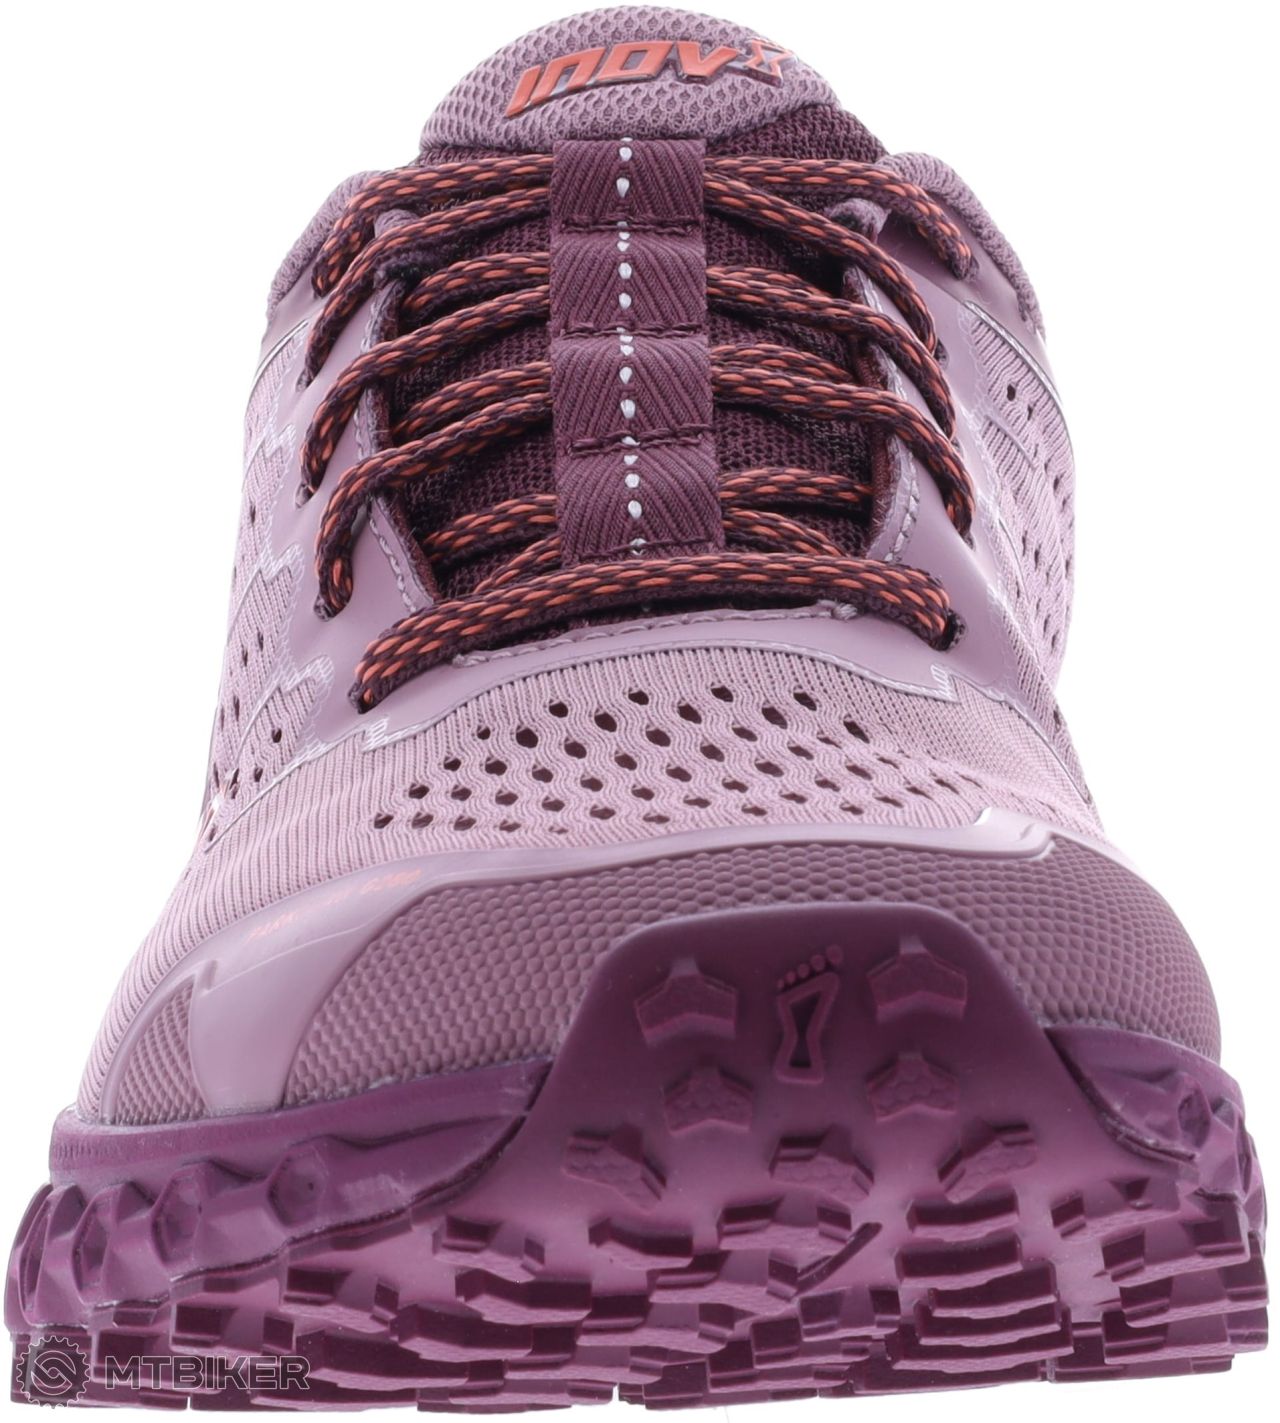 Inov-8 Parkclaw G 280 - Trail Running Shoes Women's, Free UK Delivery